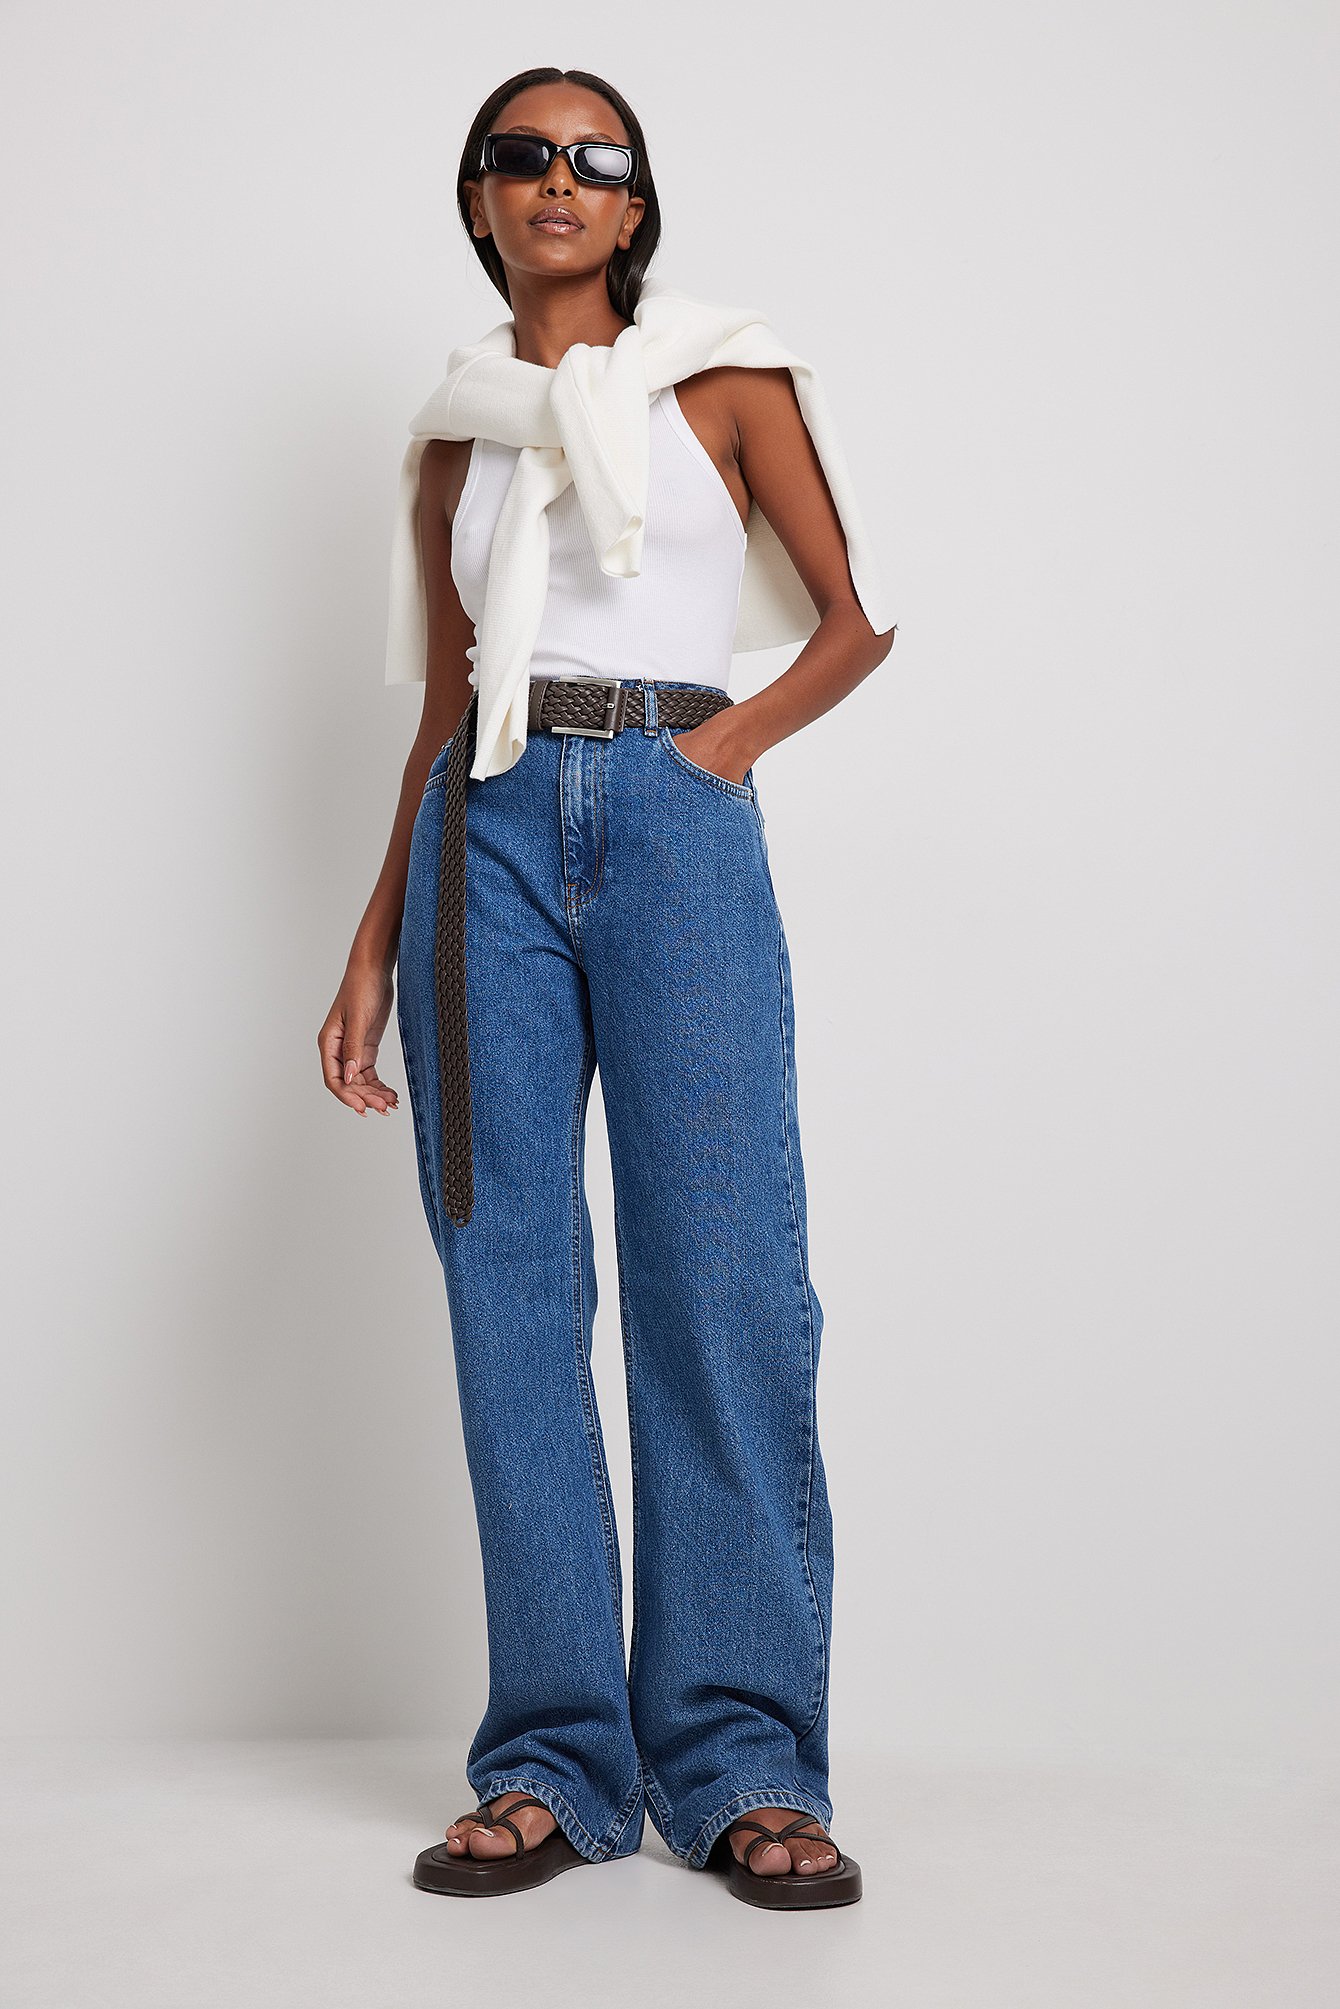 Relaxed Full Length Jeans Outfit